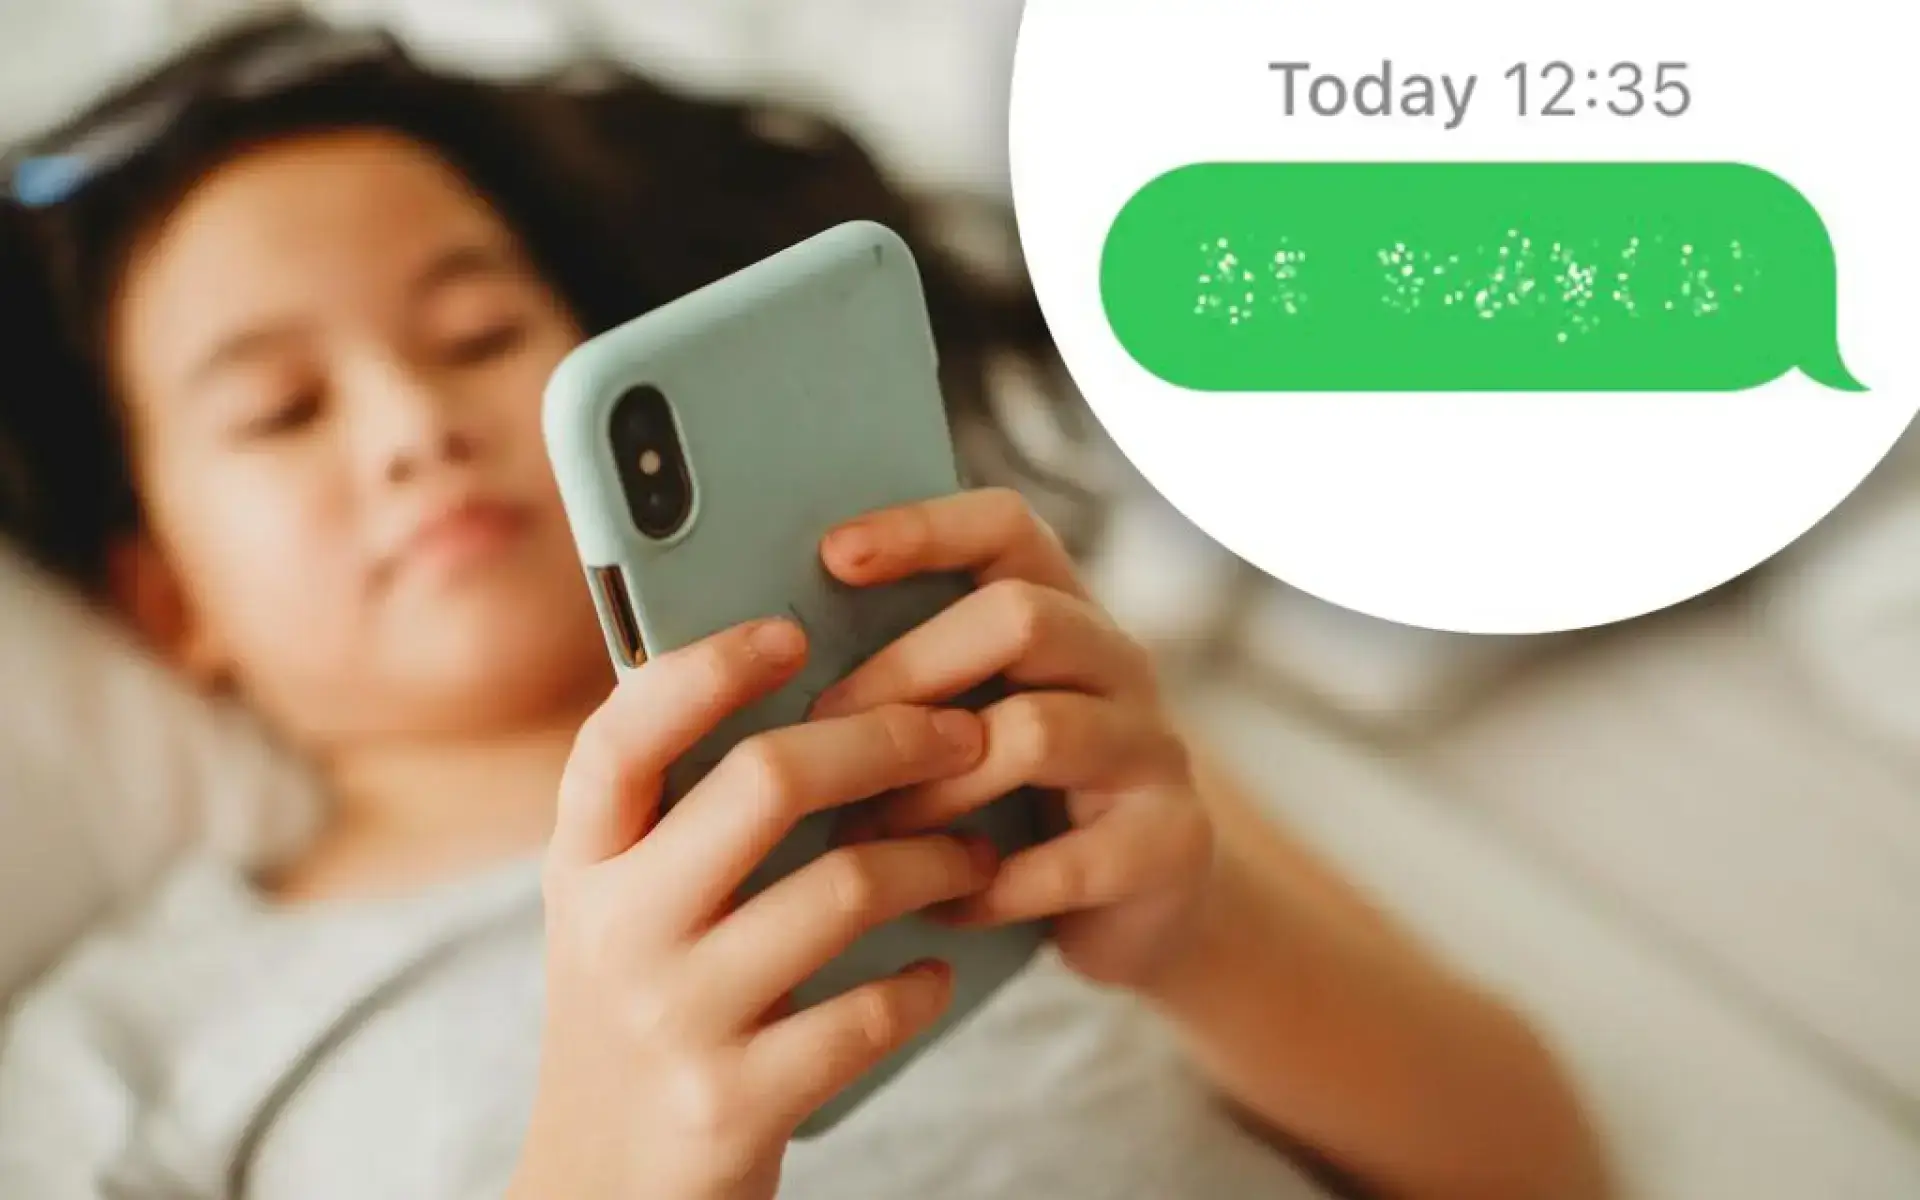 Kids are using a feature called “invisible ink” to fool parents, Revealed